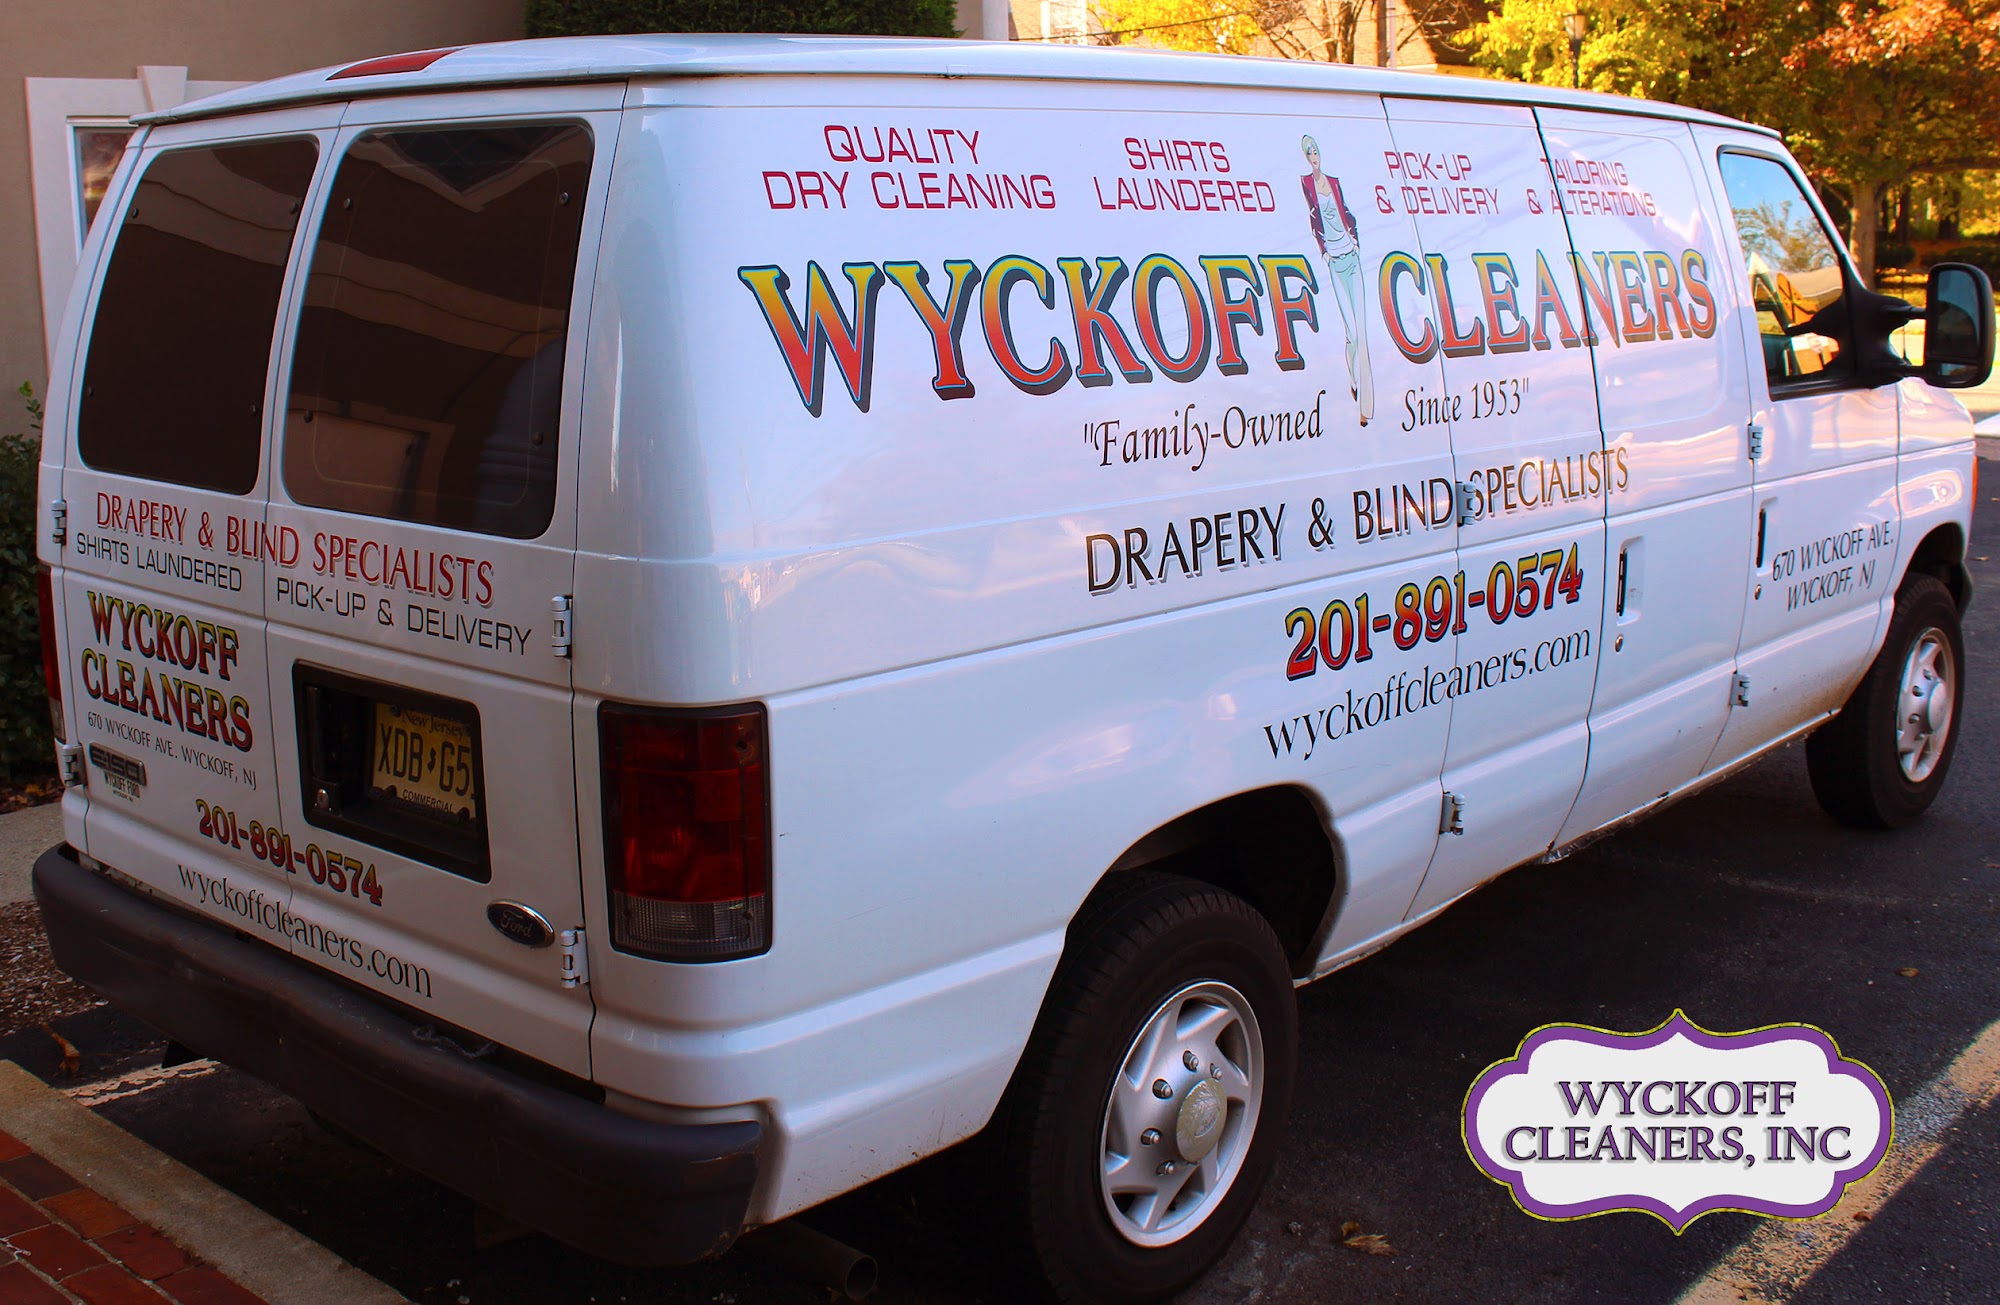 Wyckoff Cleaners 670 Wyckoff Ave, Wyckoff New Jersey 07481